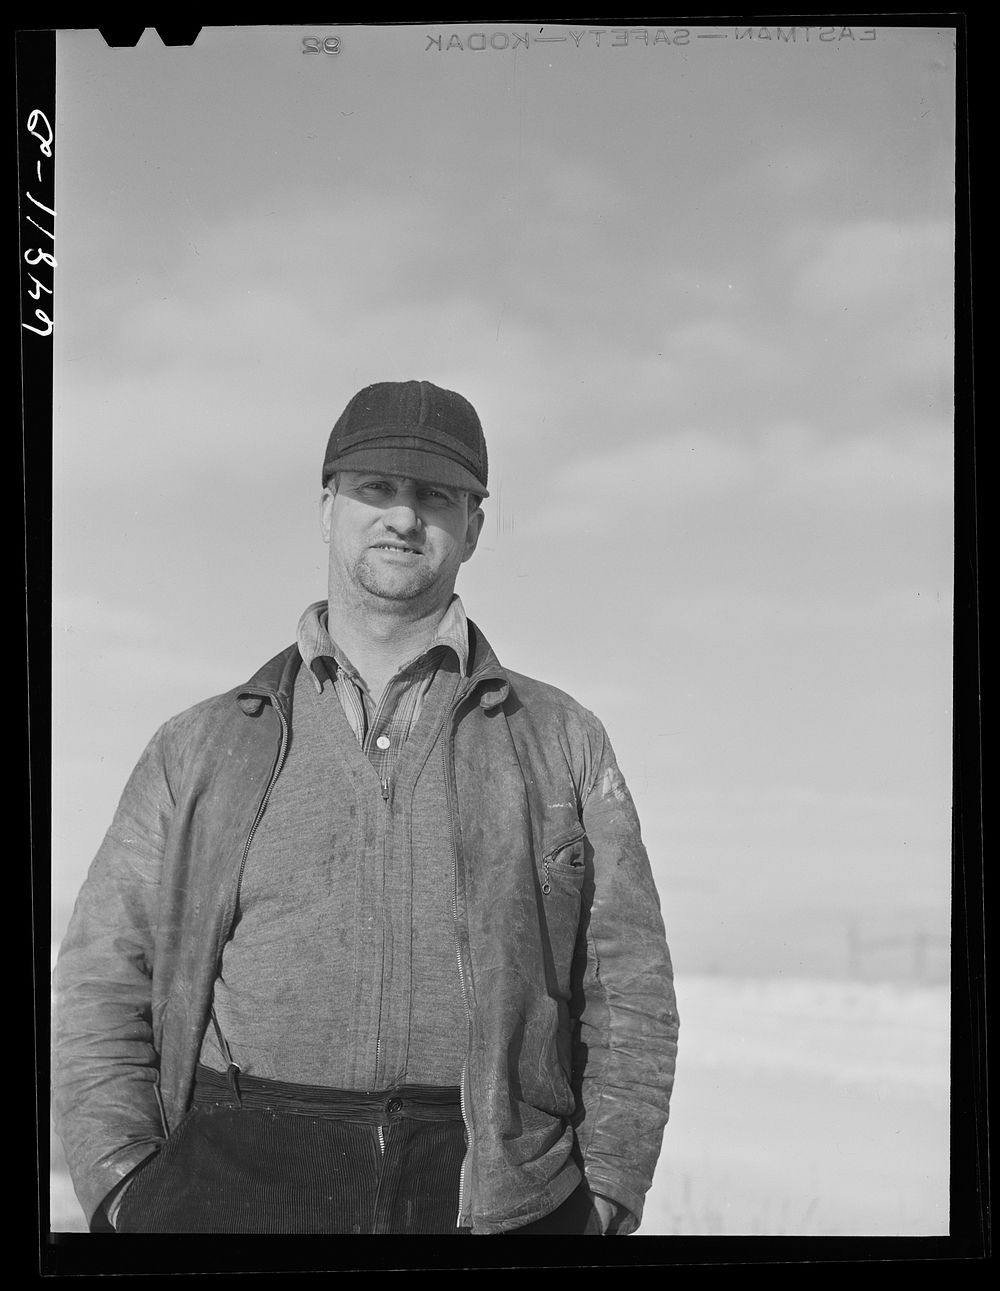 Adams County, North Dakota. Stock farmer. Sourced from the Library of Congress.